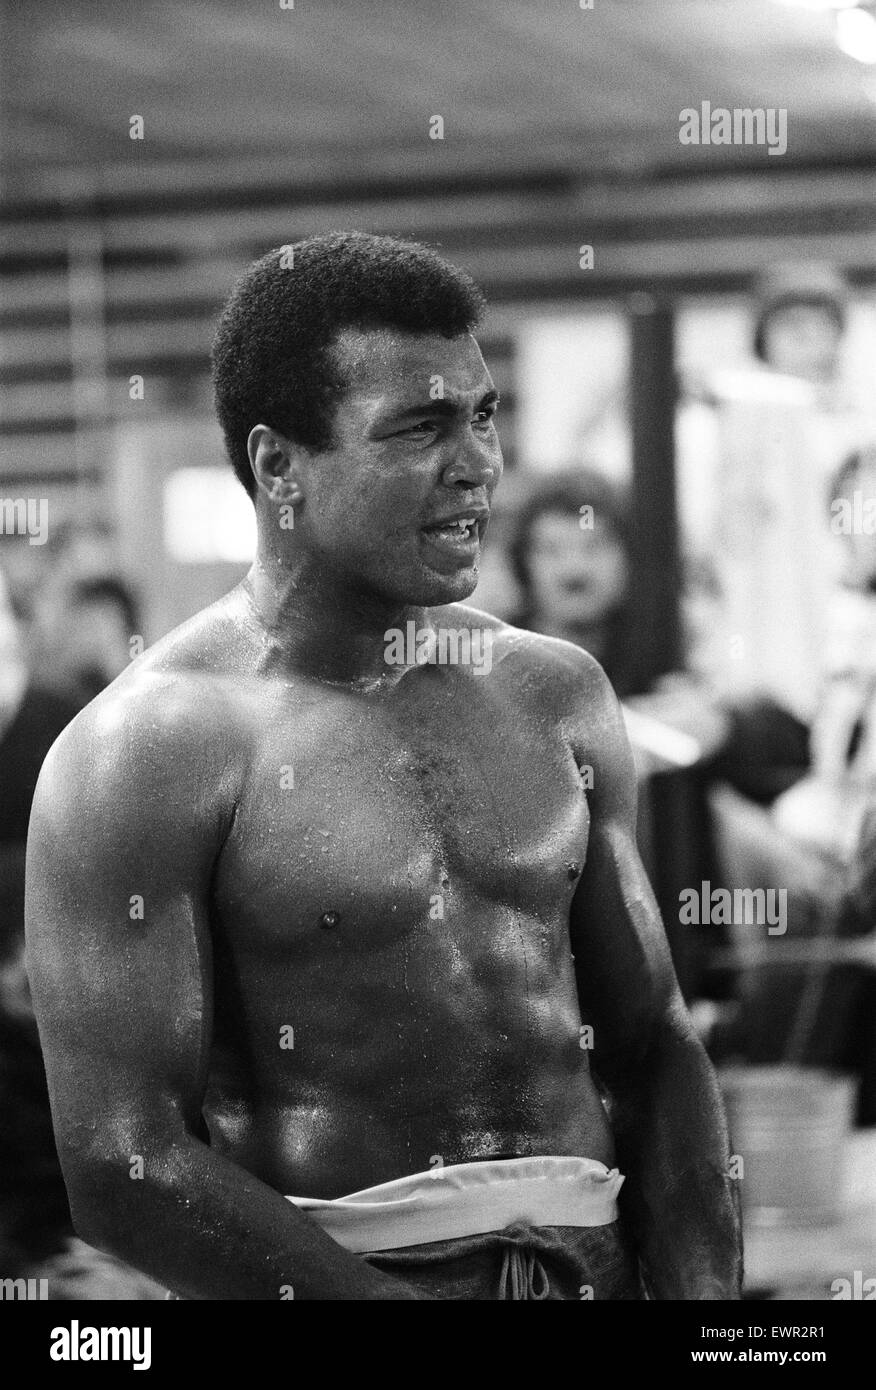 Muhammad Ali Training Camp In High Resolution Stock Photography and ...